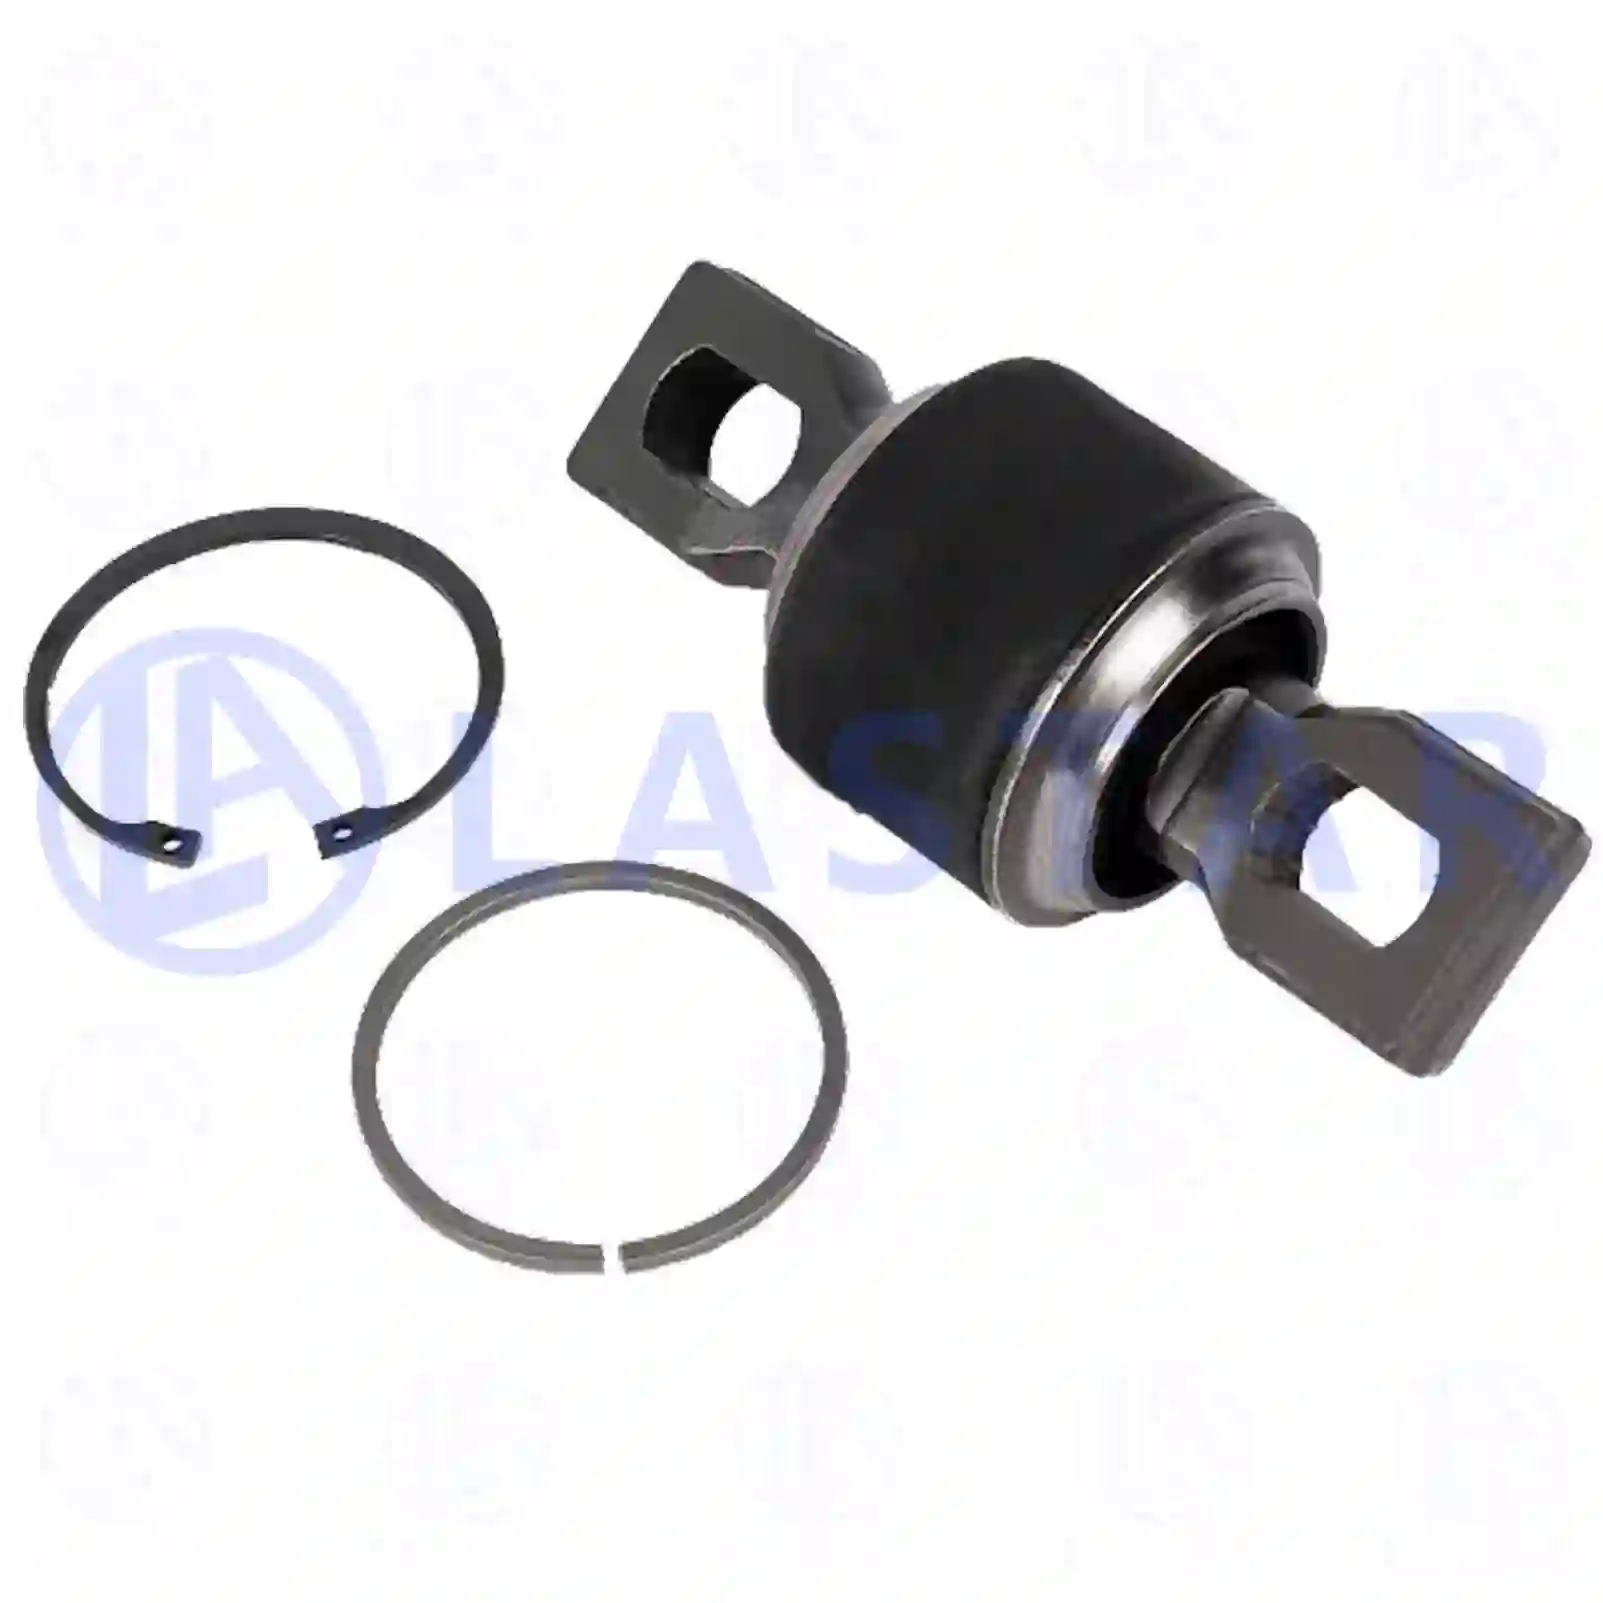 Repair kit, v-stay, 77728064, 0003502005, 0003504705, , , , ||  77728064 Lastar Spare Part | Truck Spare Parts, Auotomotive Spare Parts Repair kit, v-stay, 77728064, 0003502005, 0003504705, , , , ||  77728064 Lastar Spare Part | Truck Spare Parts, Auotomotive Spare Parts